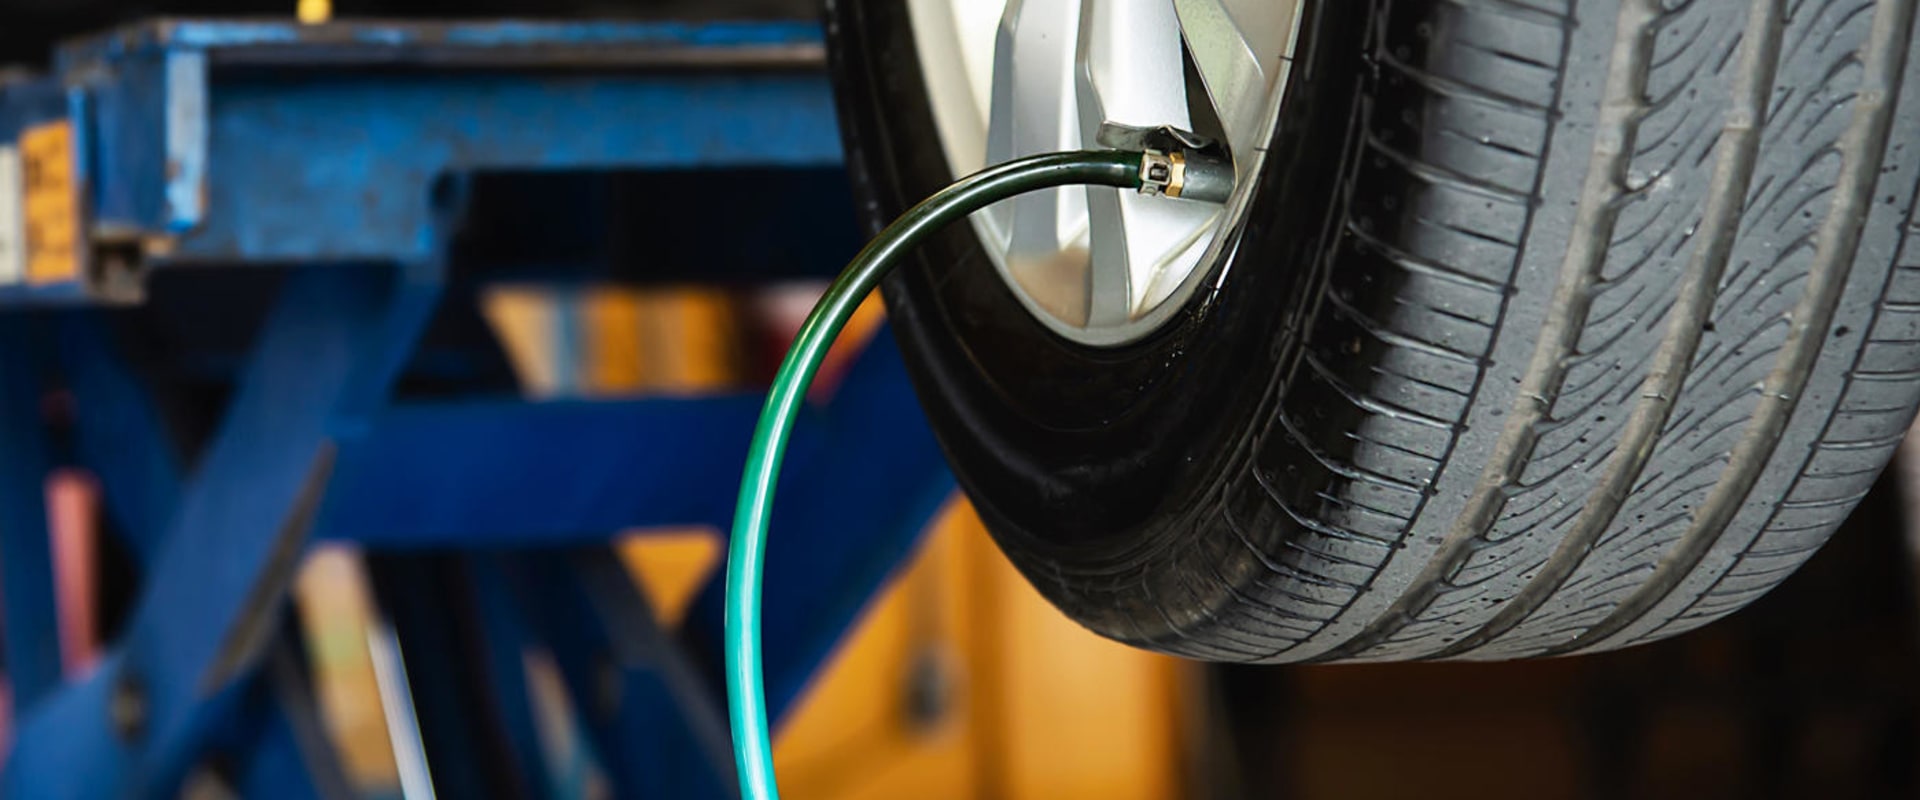 Mobile Alignment and Balancing Services in Cedar Park - Get the Best Quality at Lamb's Tire & Automotive